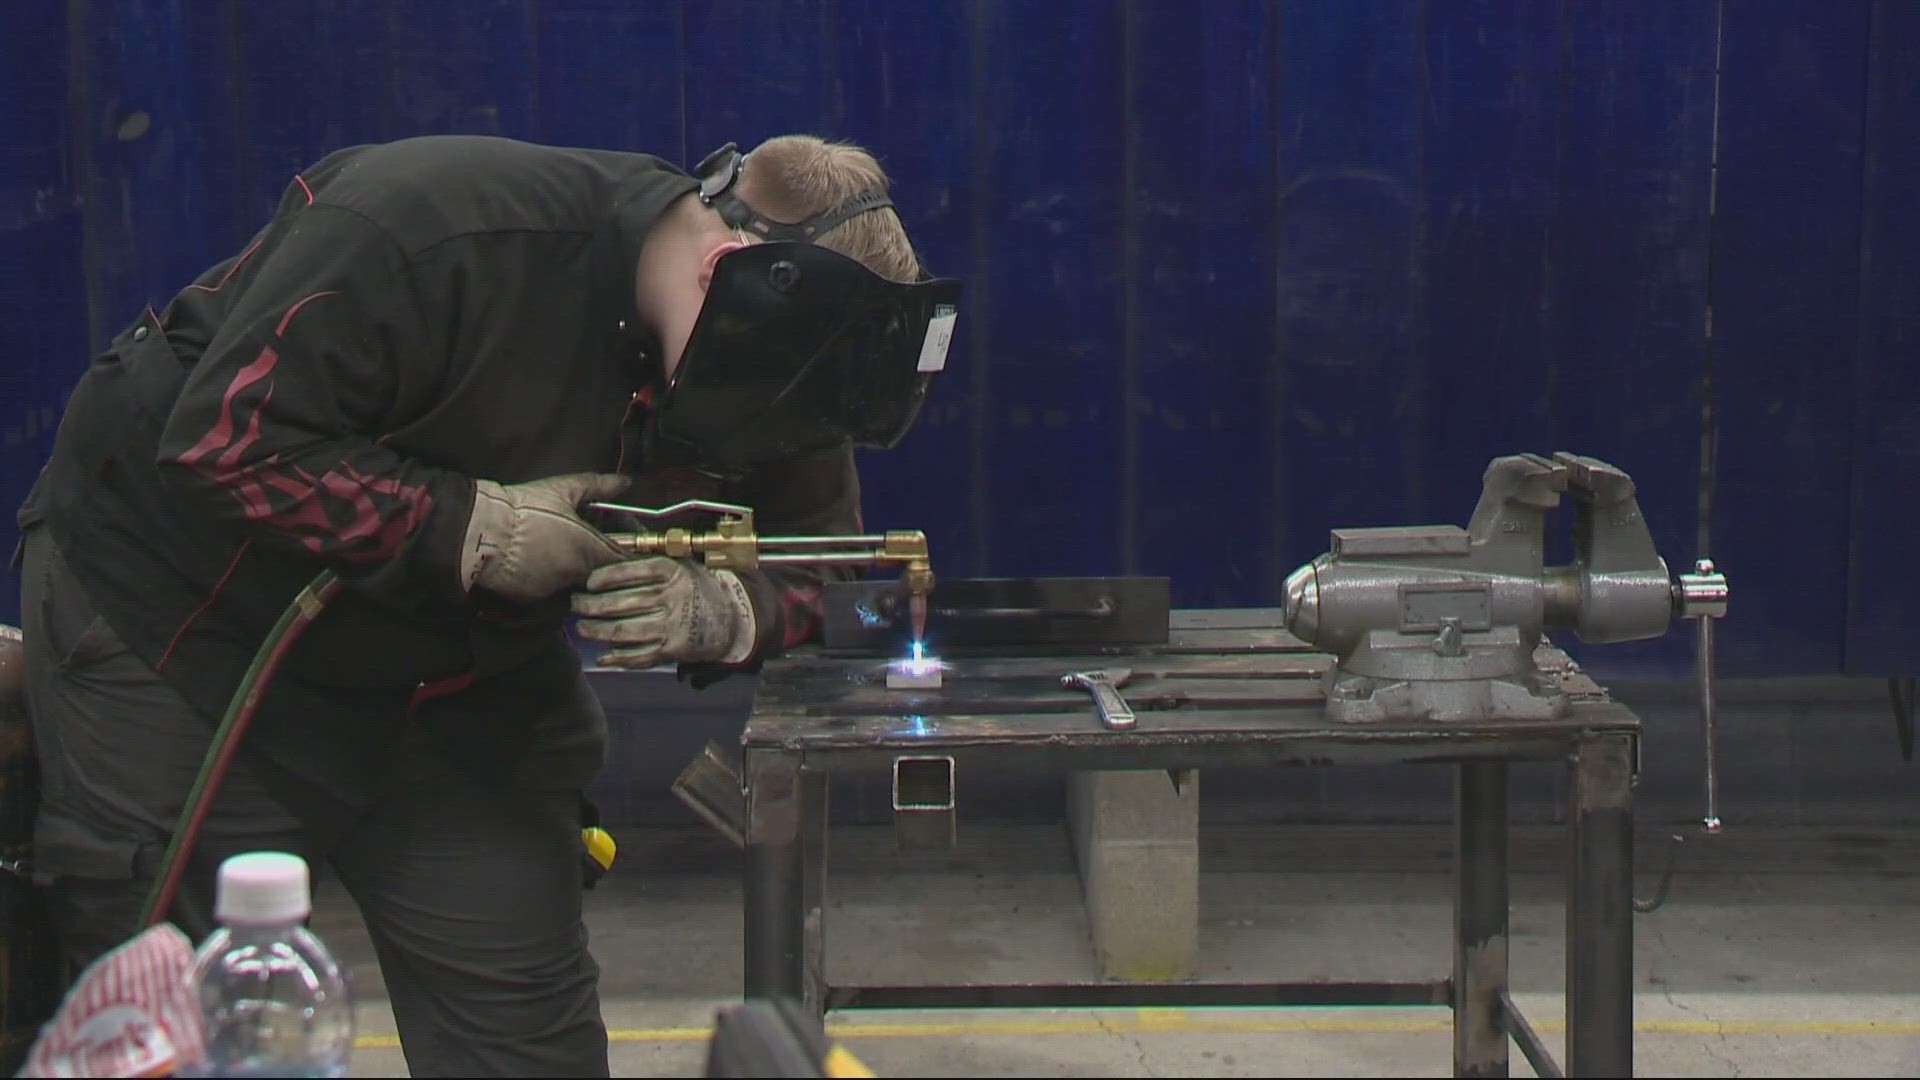 The SkillsUSA regional welding competition for SW Washington high school students was held at Kelso High School on January 31.